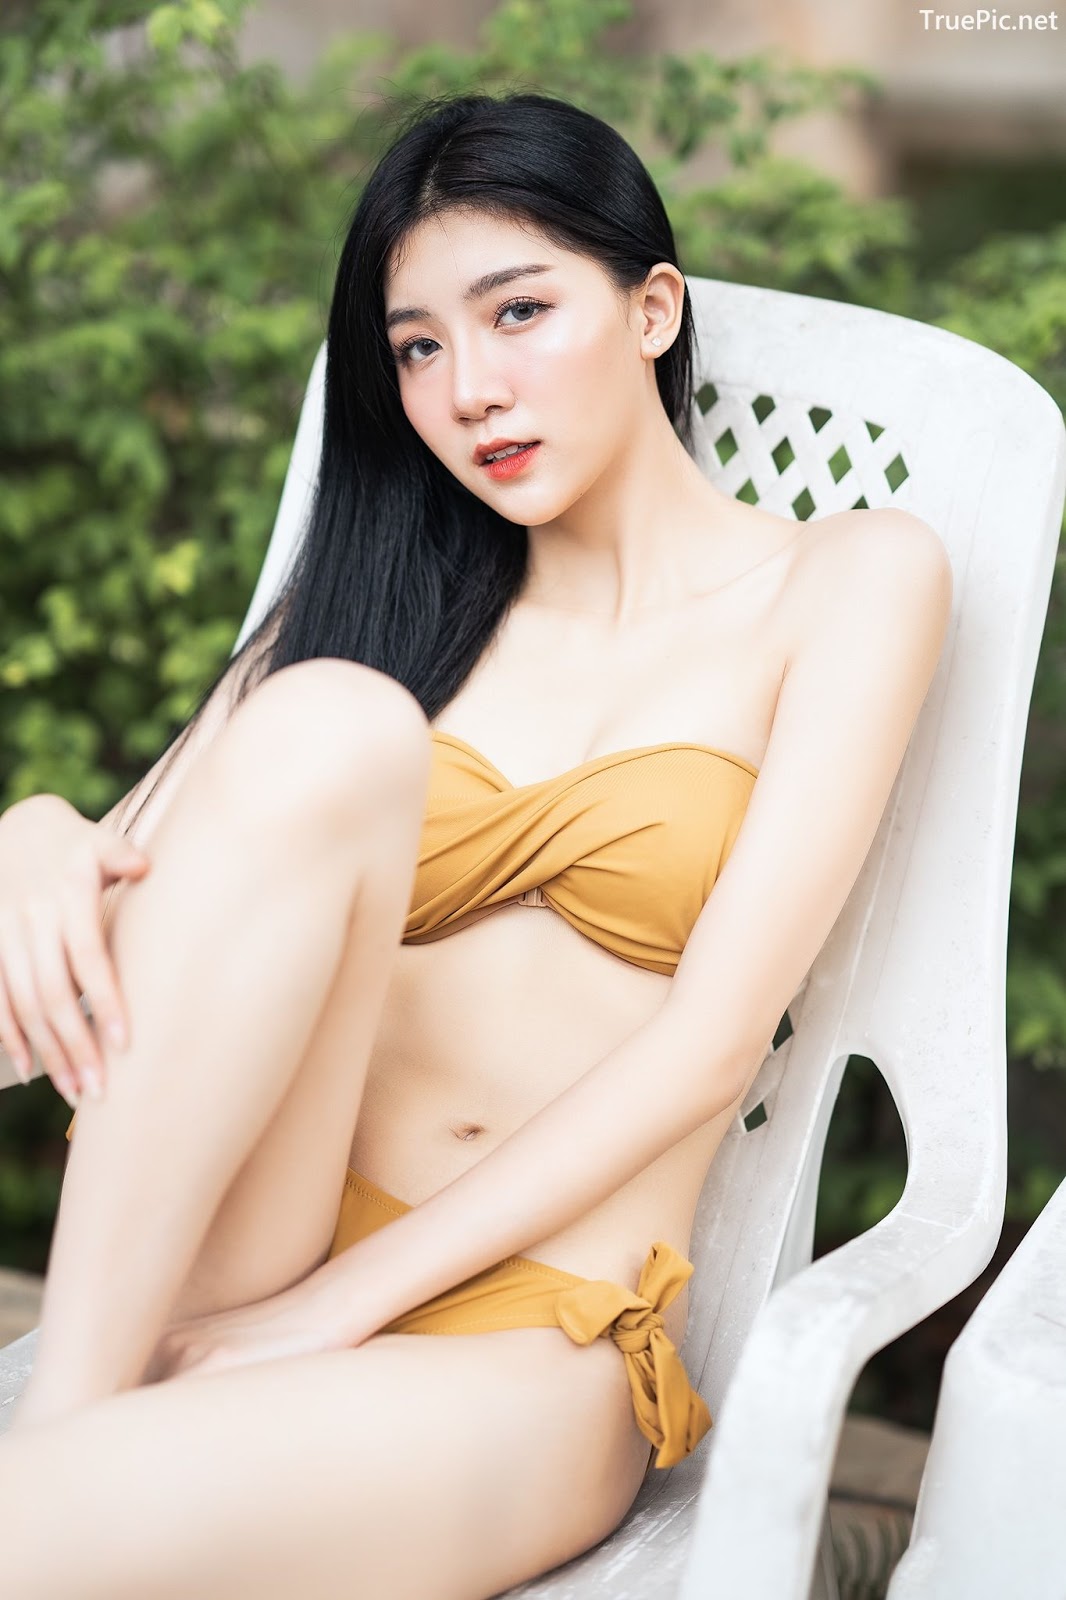 Image Thailand Model - Sasi Ngiunwan - Let’s Summer Chilling - TruePic.net - Picture-11